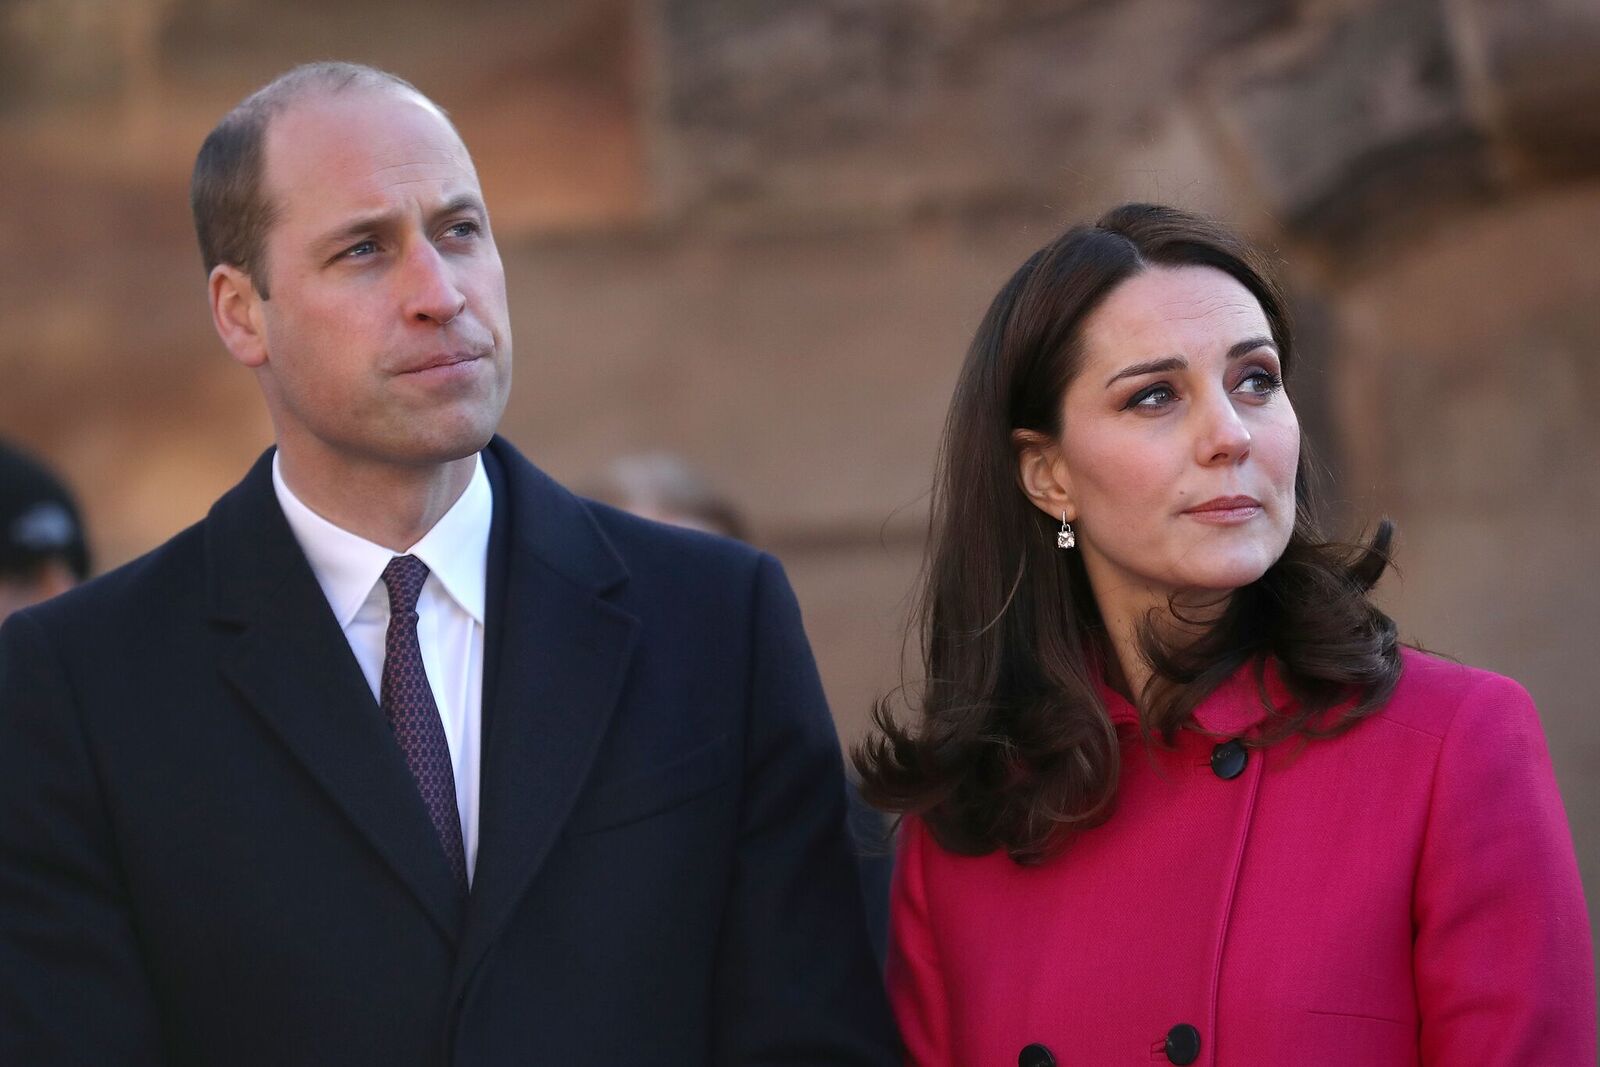 Prince William, Duke of Cambridge and Catherine, Duchess of Cambridge arrive for their visit to Coventry Cathedral during their visit to the city on January 16, 2018 | Photo: Getty Images